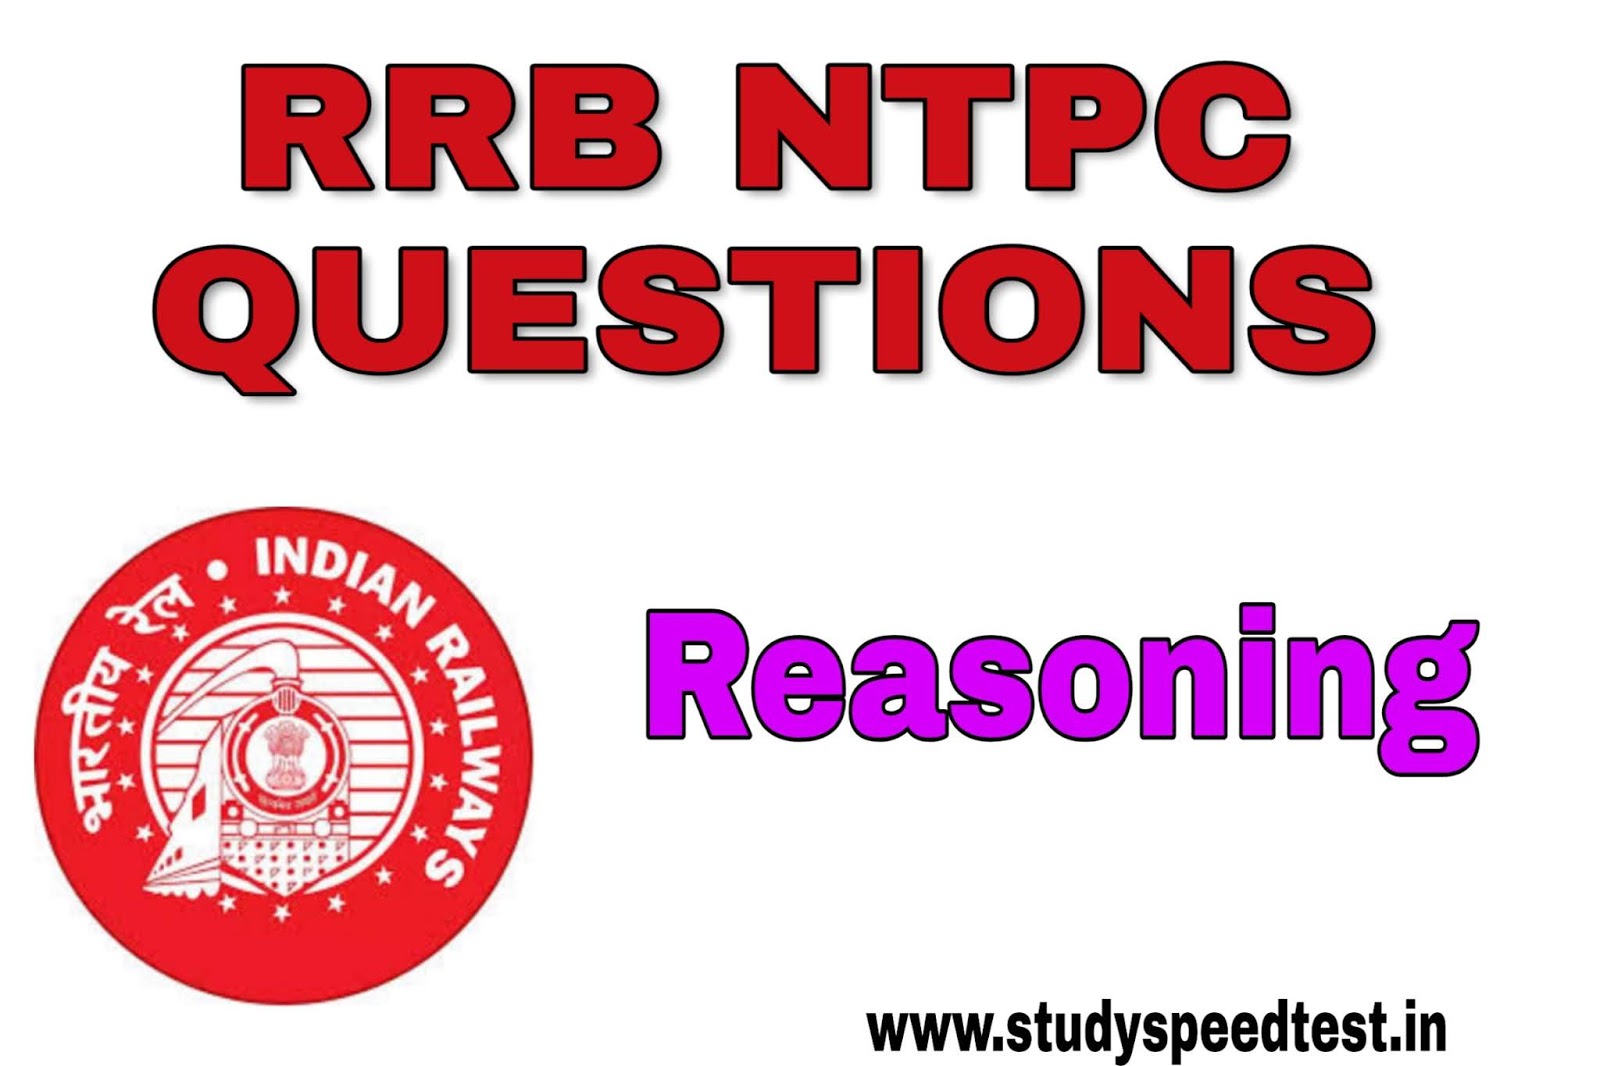 rrb-ntpc-speed-test-reasoning-questions-study-speed-test-online-study-for-comptetive-exam